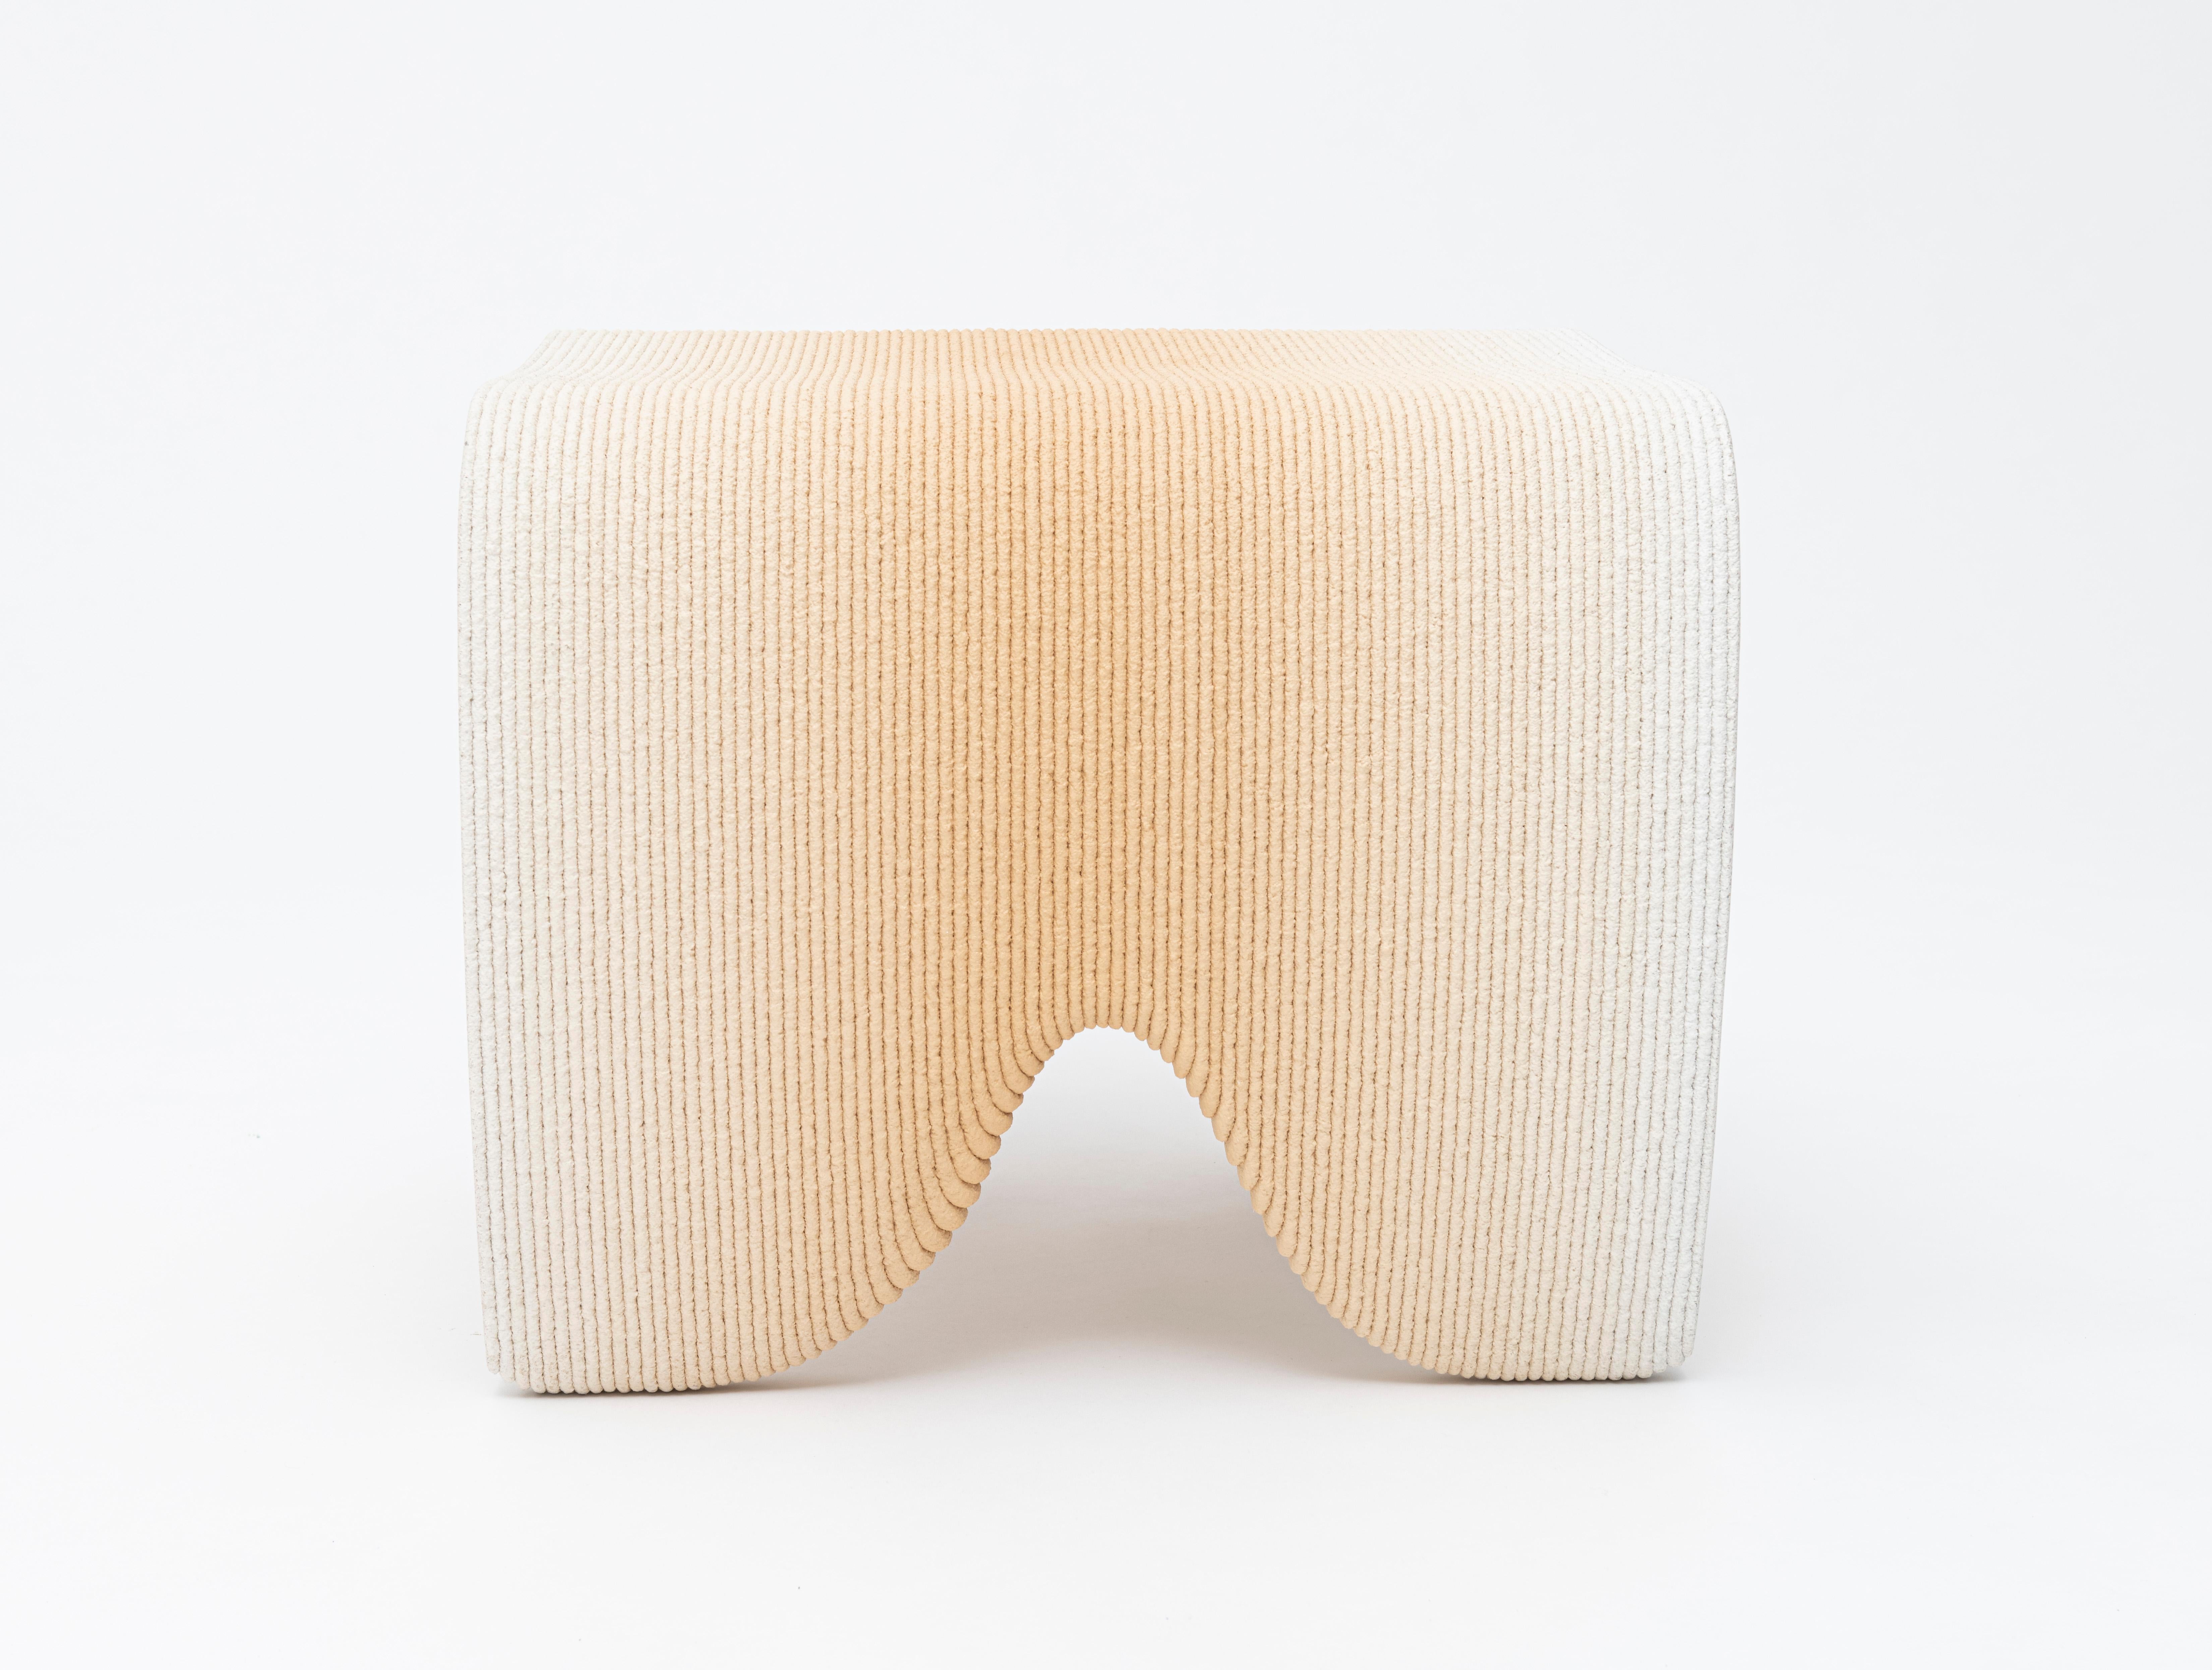 Gradient stool by Philipp Aduatz
Limited Edition of 50
Dimensions: 54 x 56 x 45 cm
Materials: 3D printed concrete dyed, reinforced with steel

Available in red, blue, beige, green and black

The 3D printed gradient furniture collection is